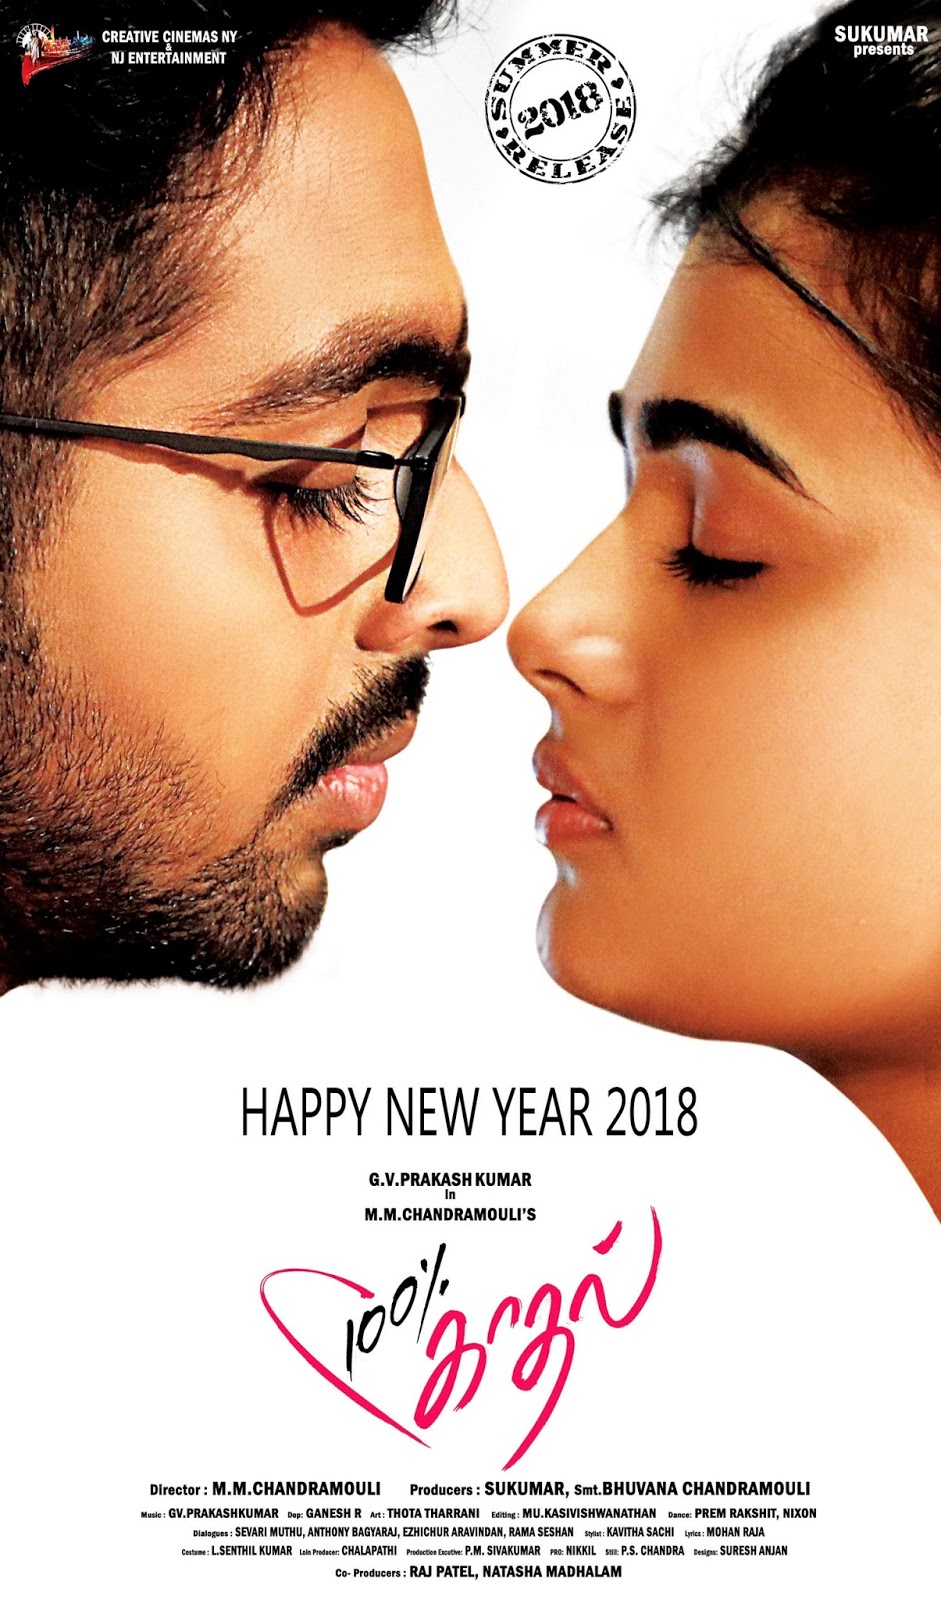 Search Tamil Movie: 100 Percent Love New Year Wishes Poster